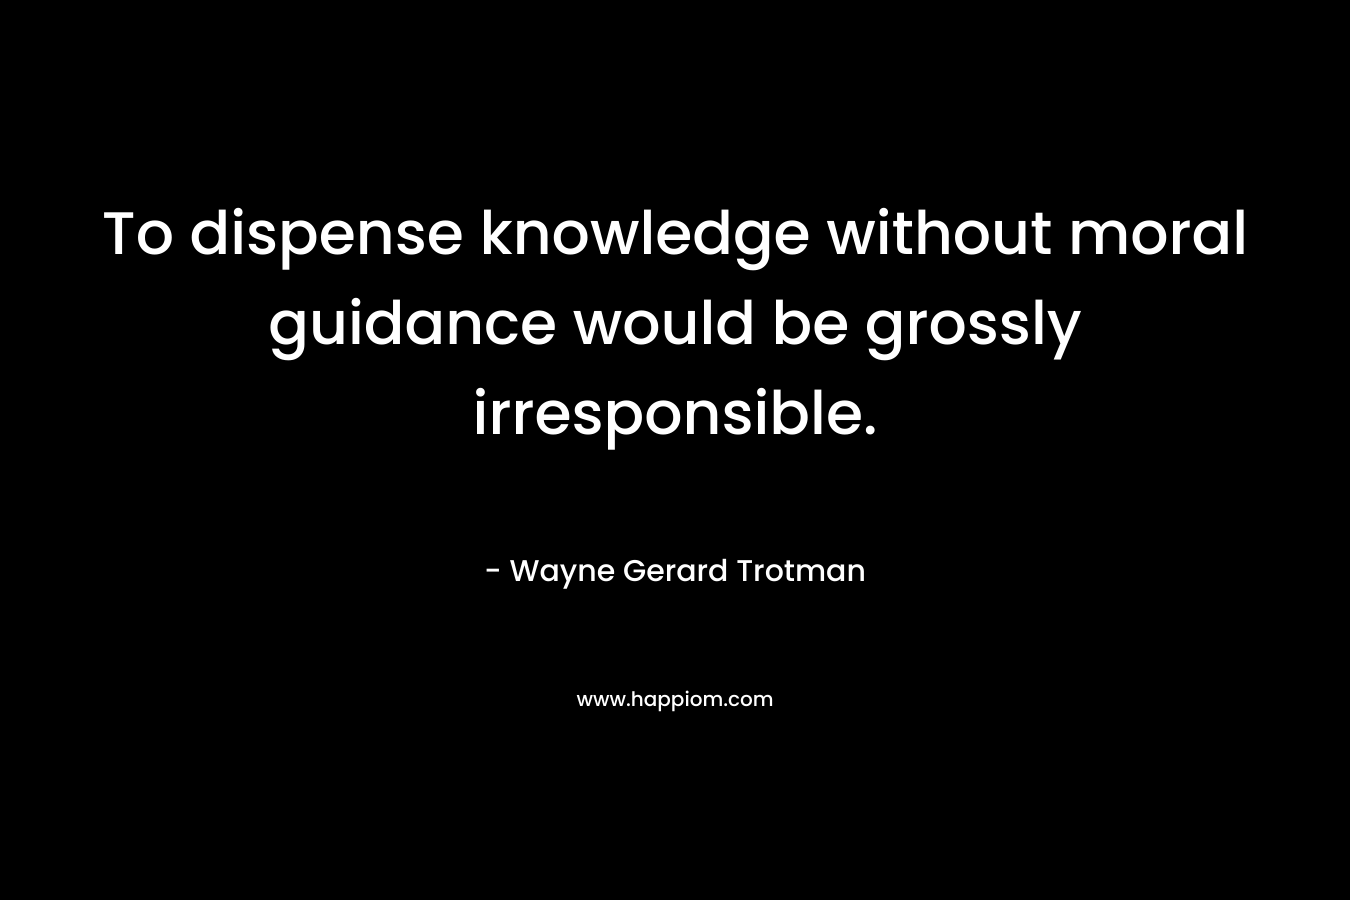 To dispense knowledge without moral guidance would be grossly irresponsible.